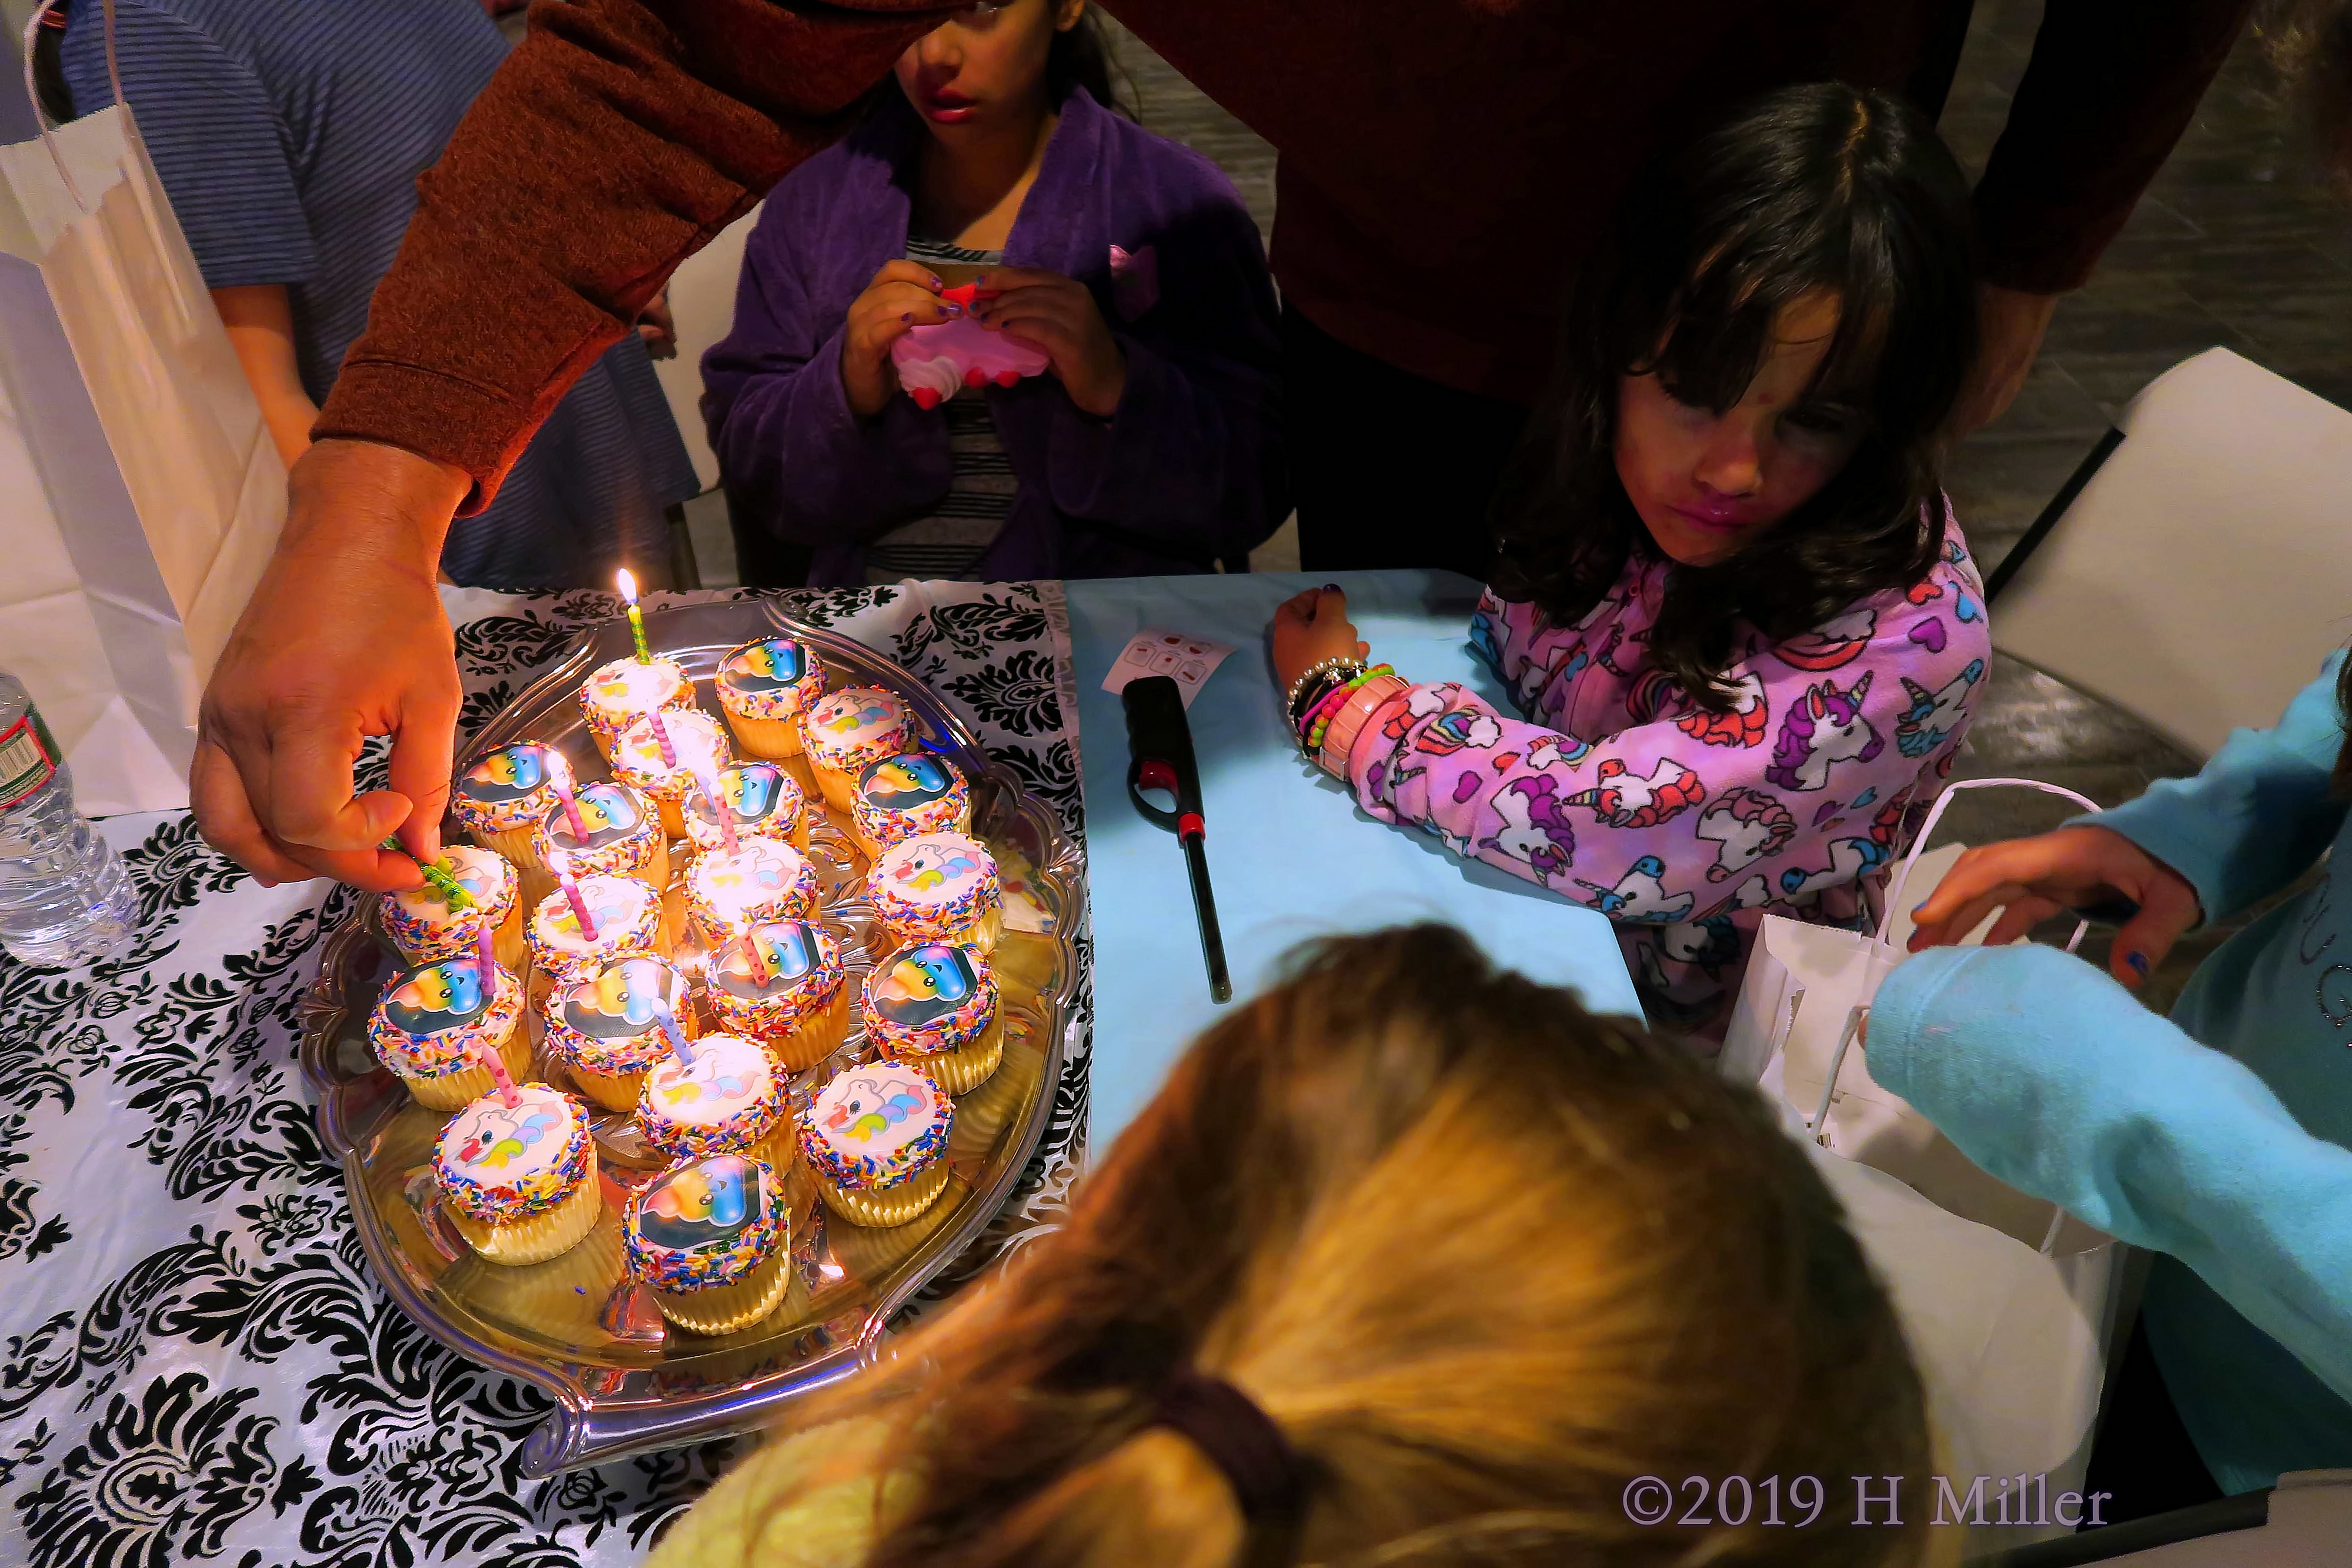 Cupcakes And Rainbows! Party Guests Gather Around The Cupcakes! 4